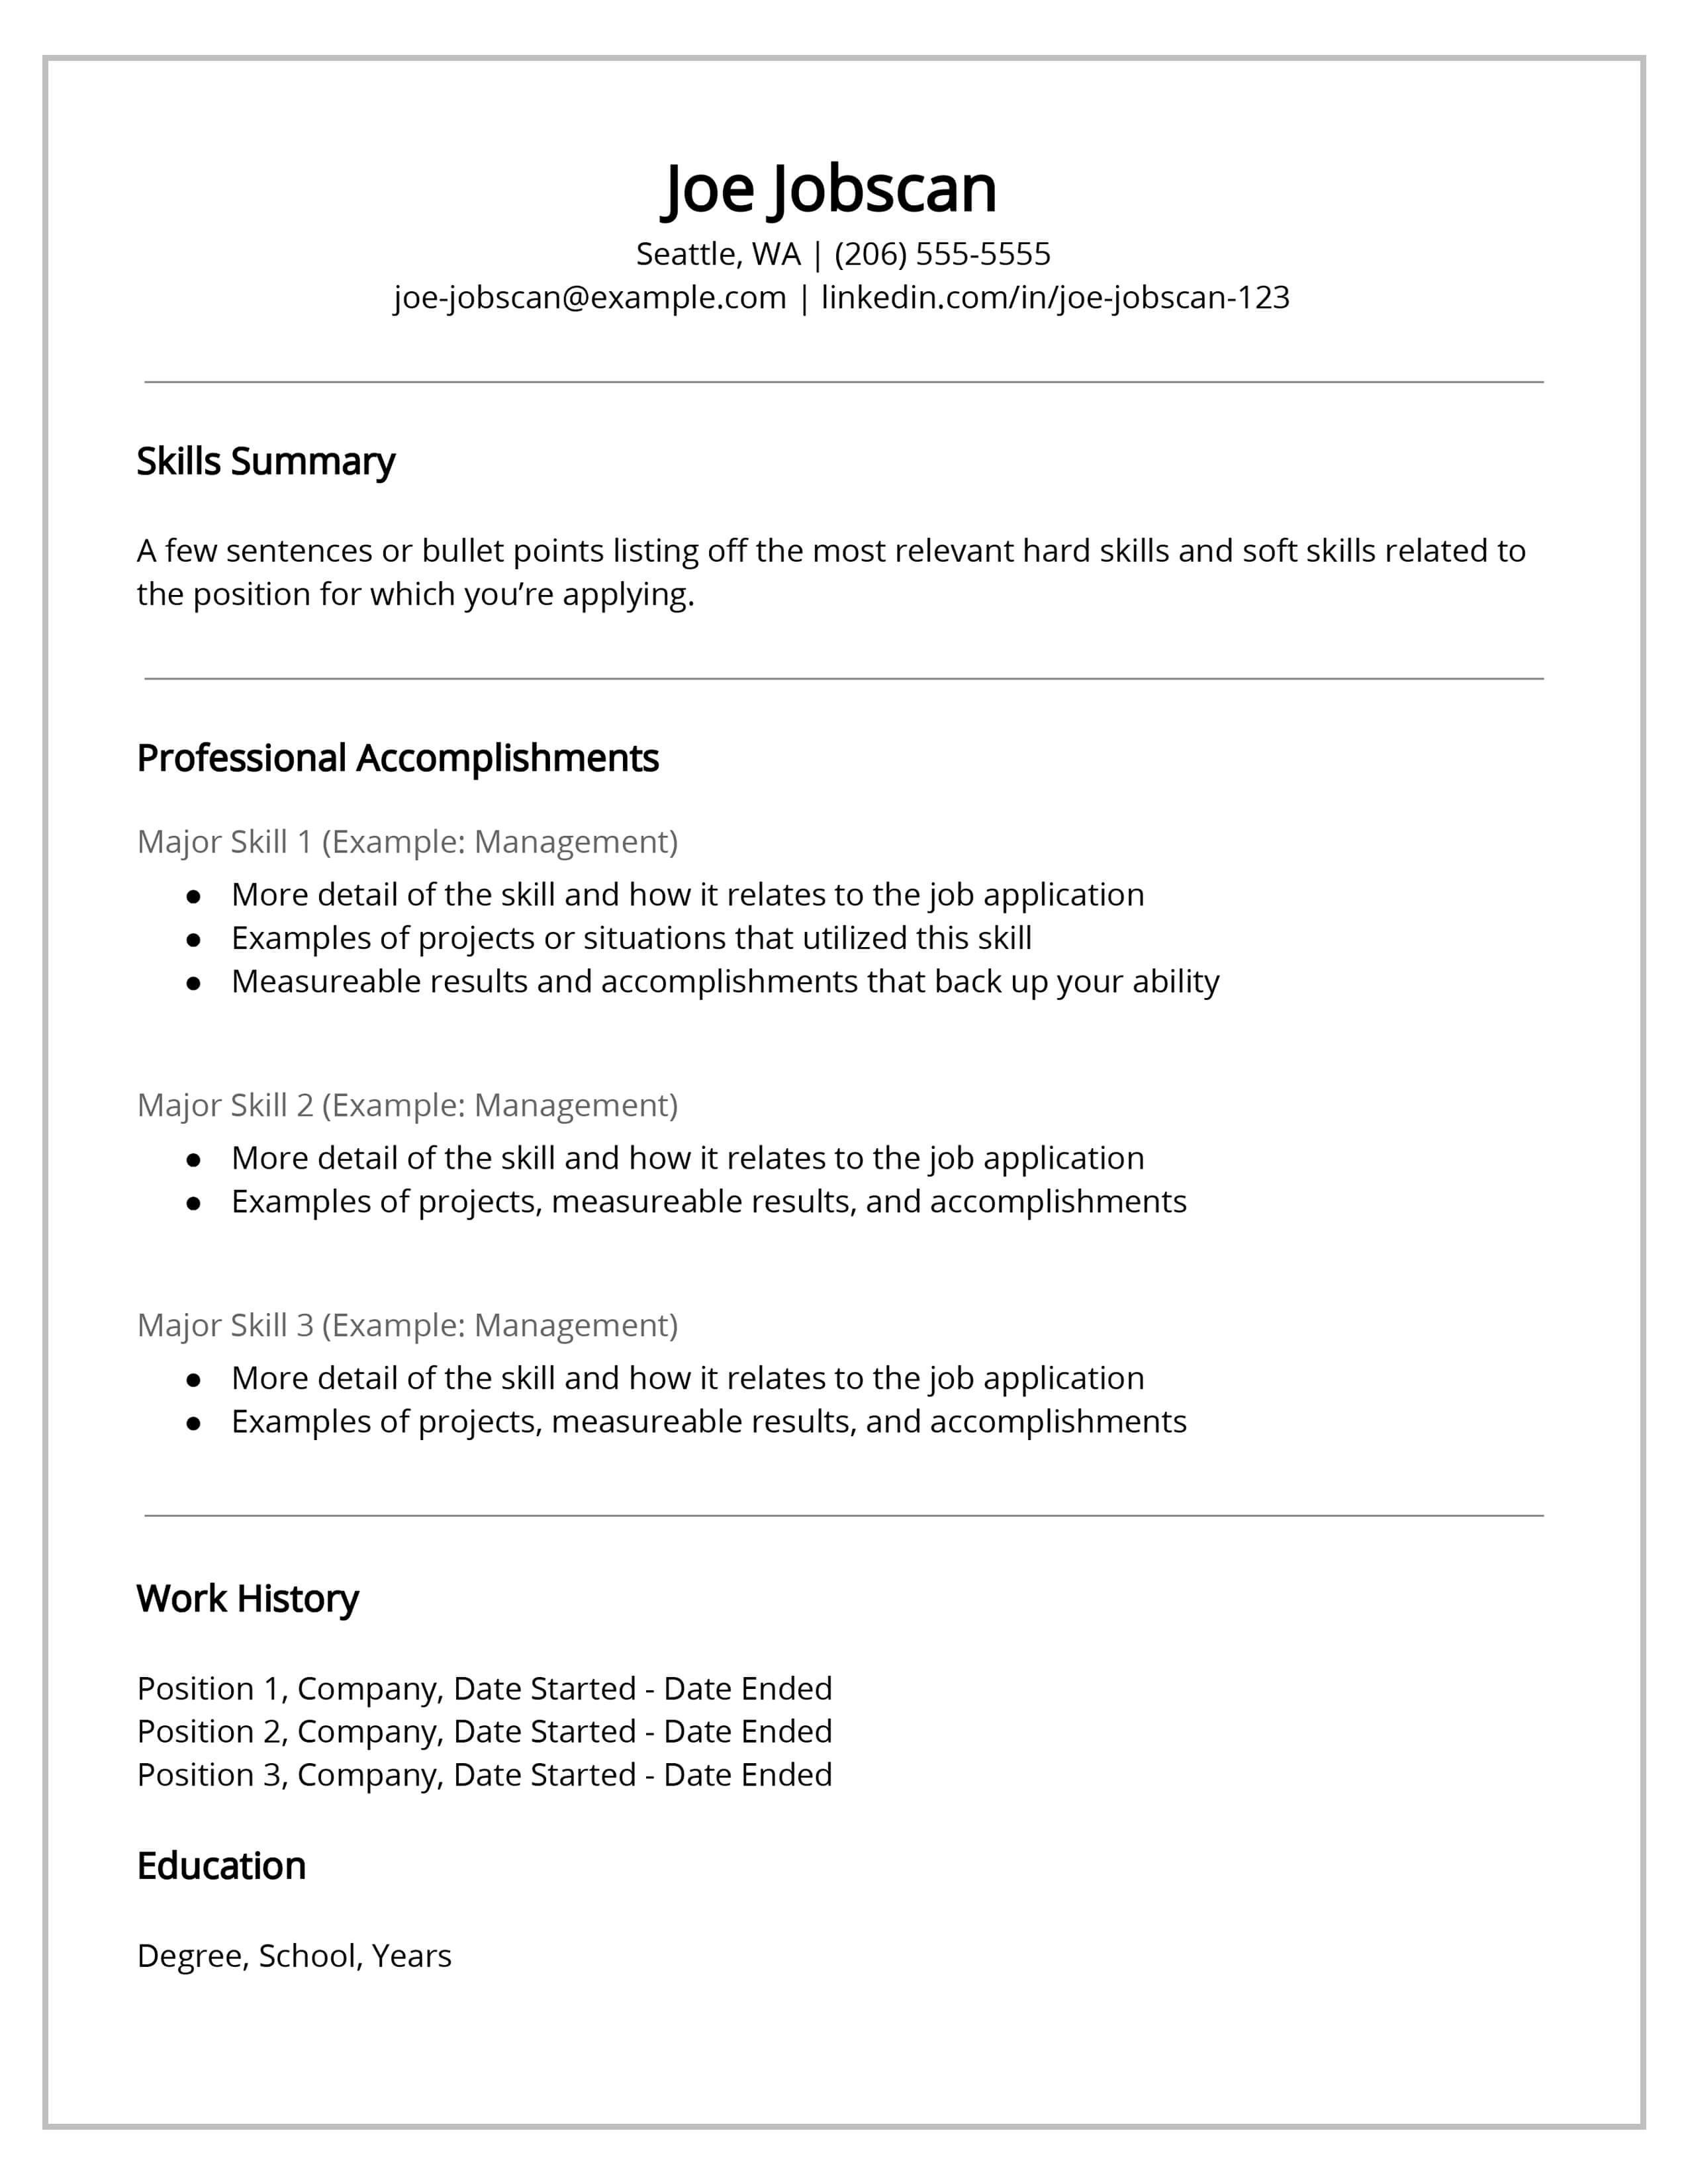 Functional Resumes Templates Free why Recruiters Hate the Functional Resume format Jobscan